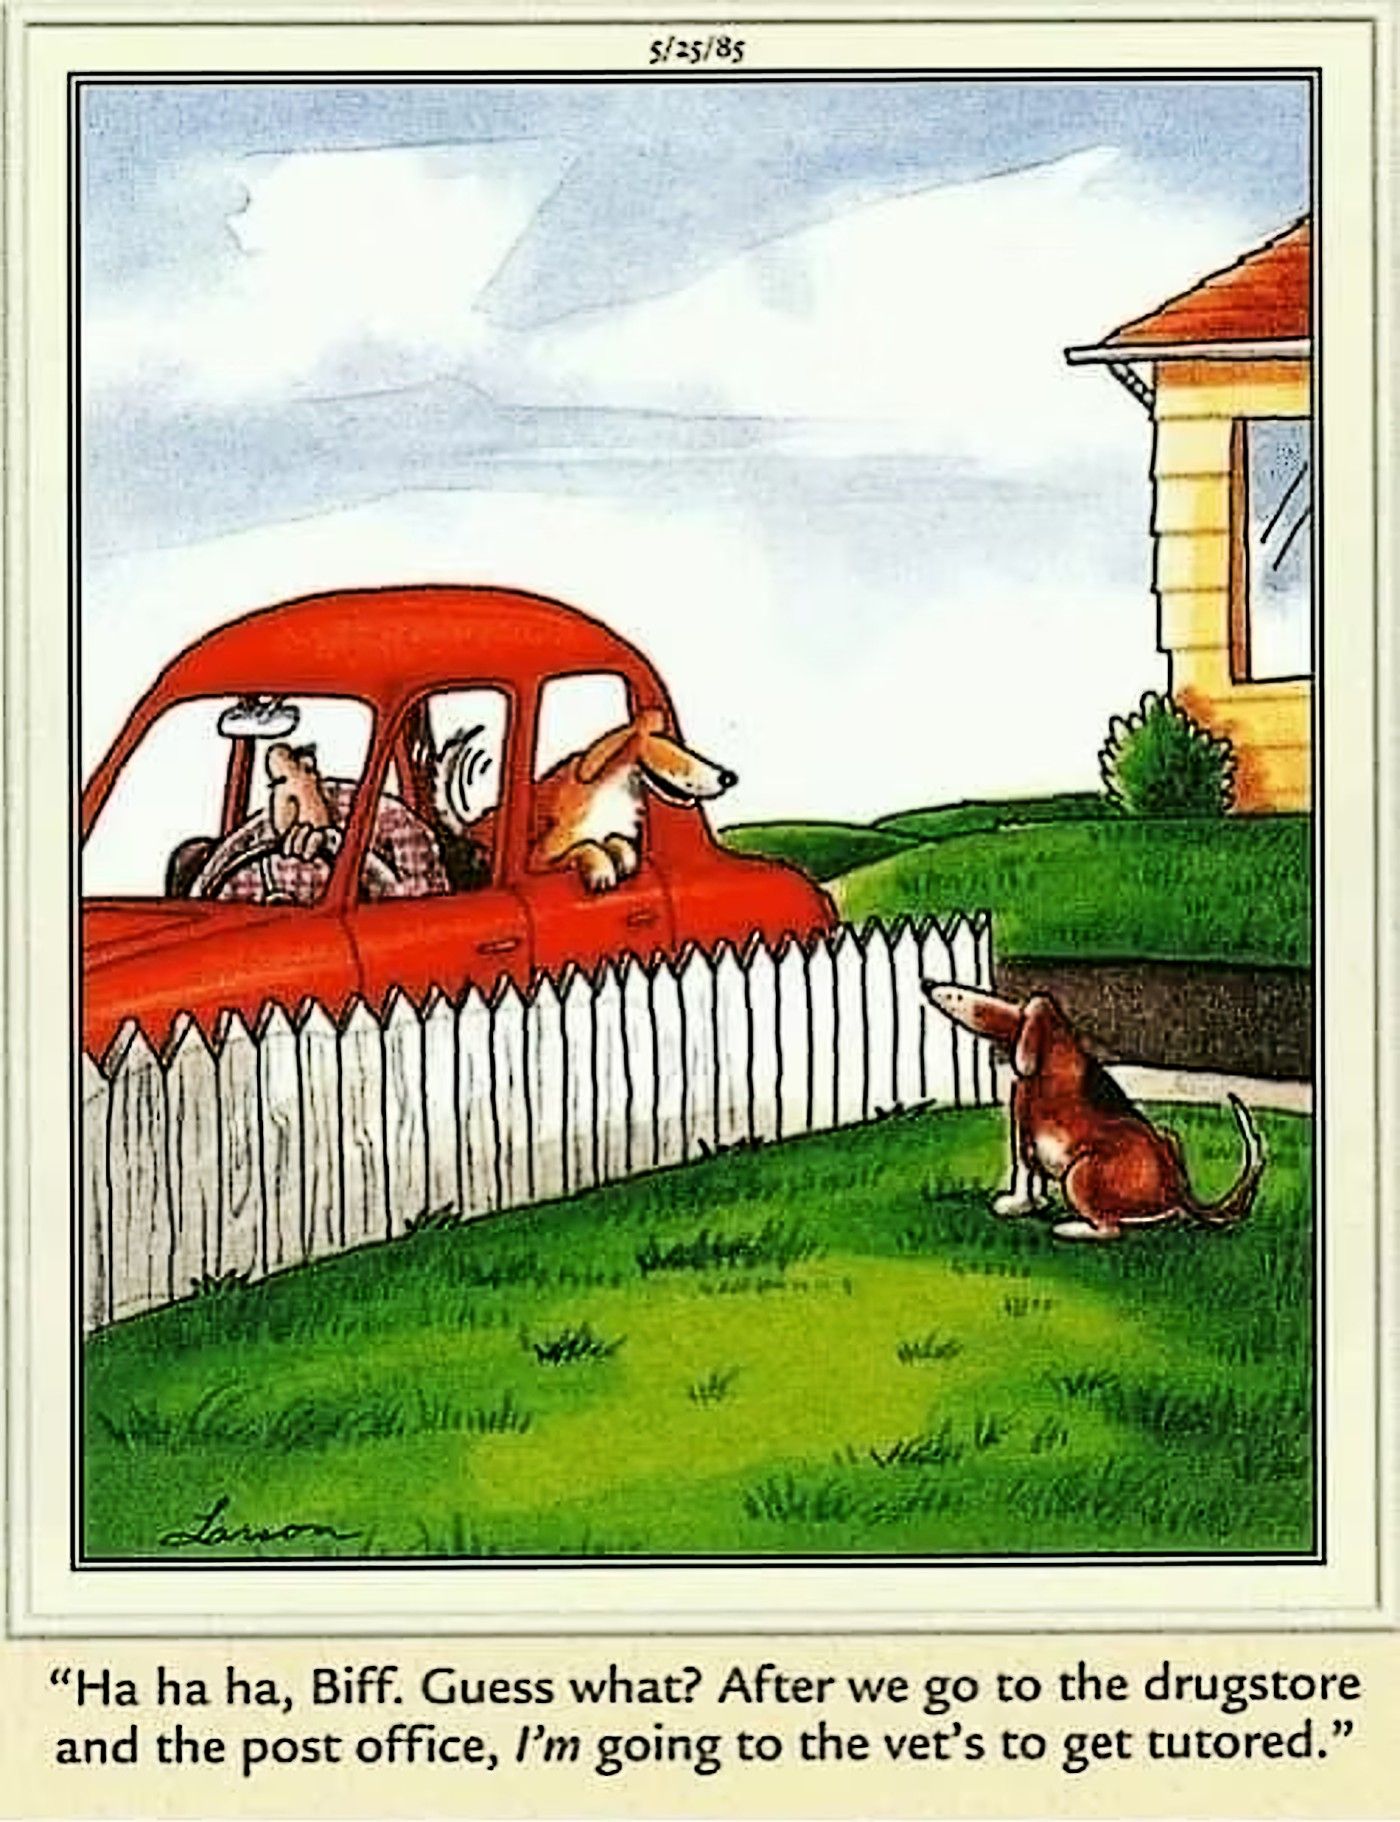 Far Side, dog mistakenly thinks its going to the vet to get tutored, rather than neutered